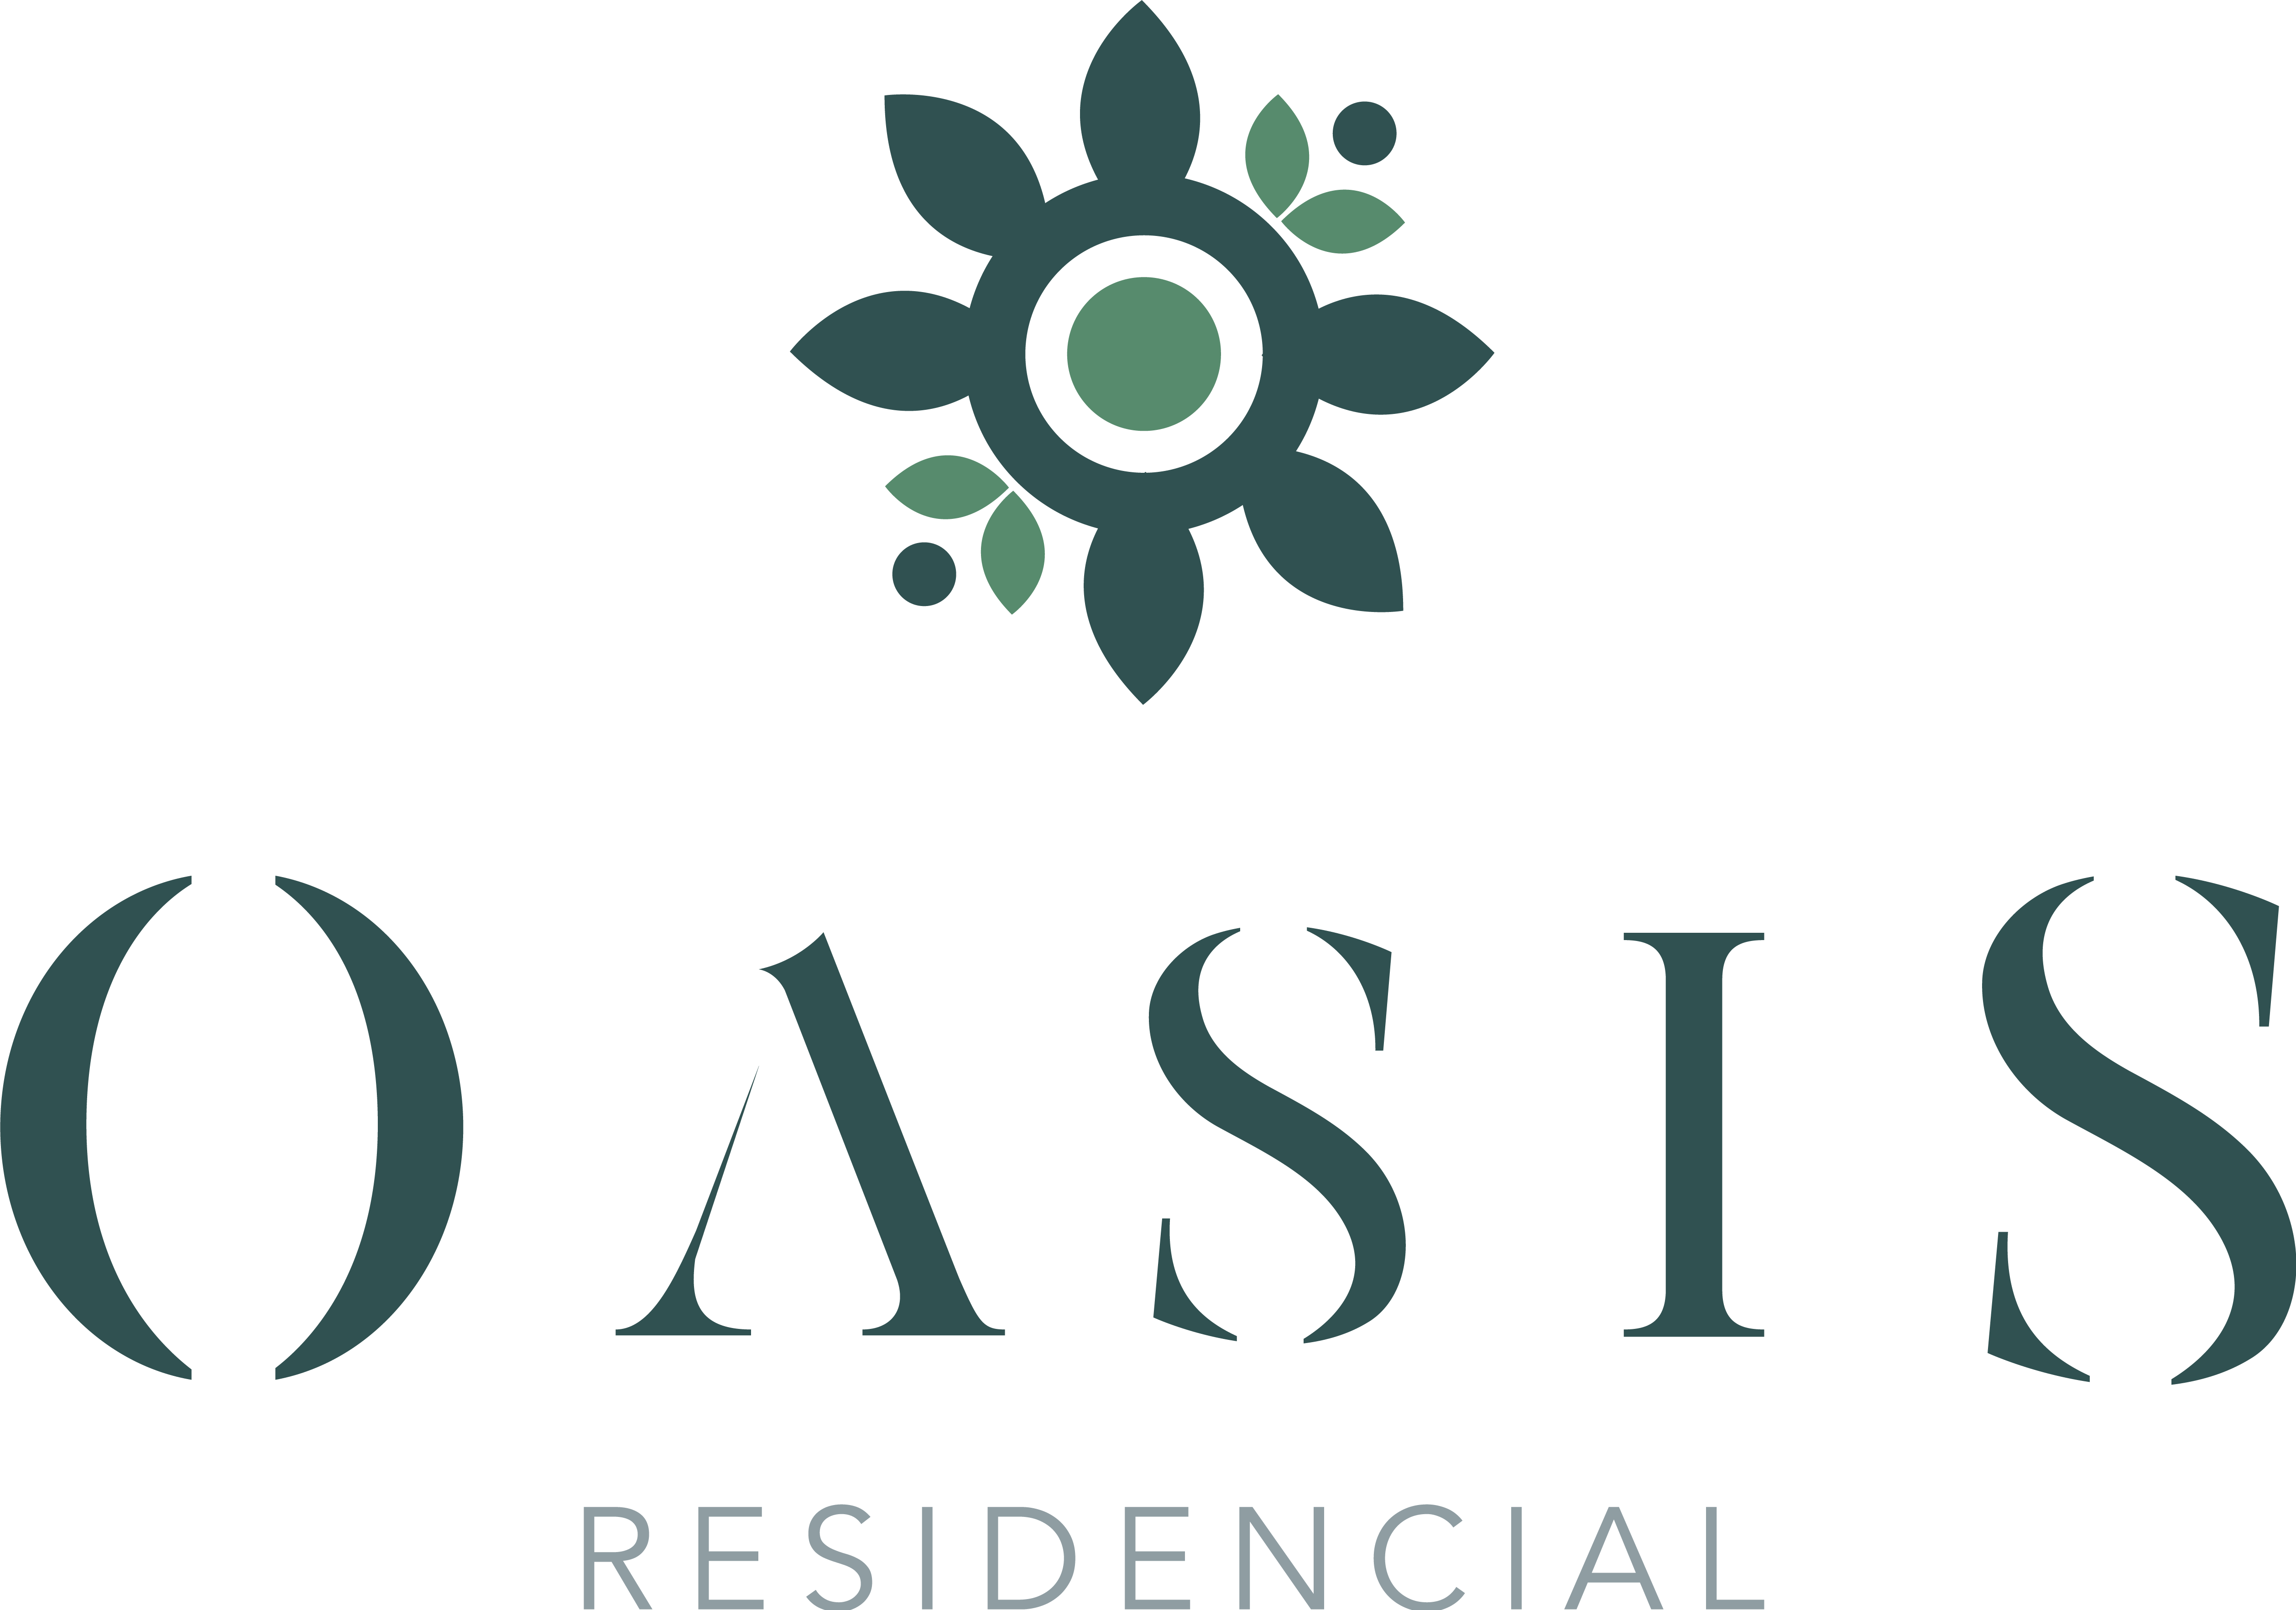 Oasis Residencial